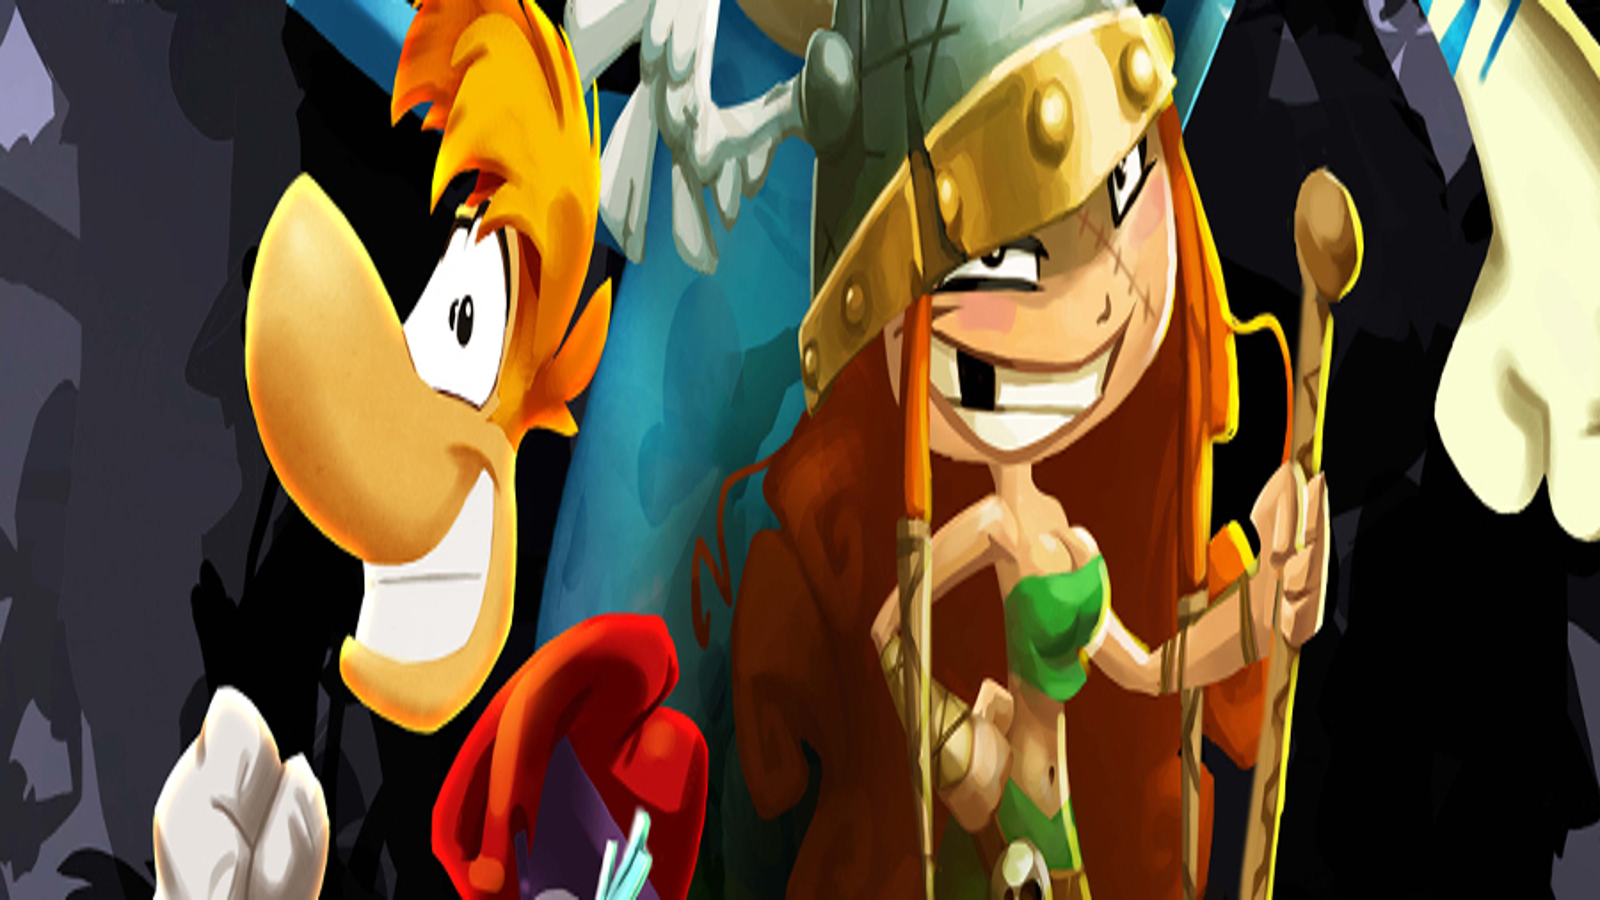 Rayman Legends is currently free on the Epic Store